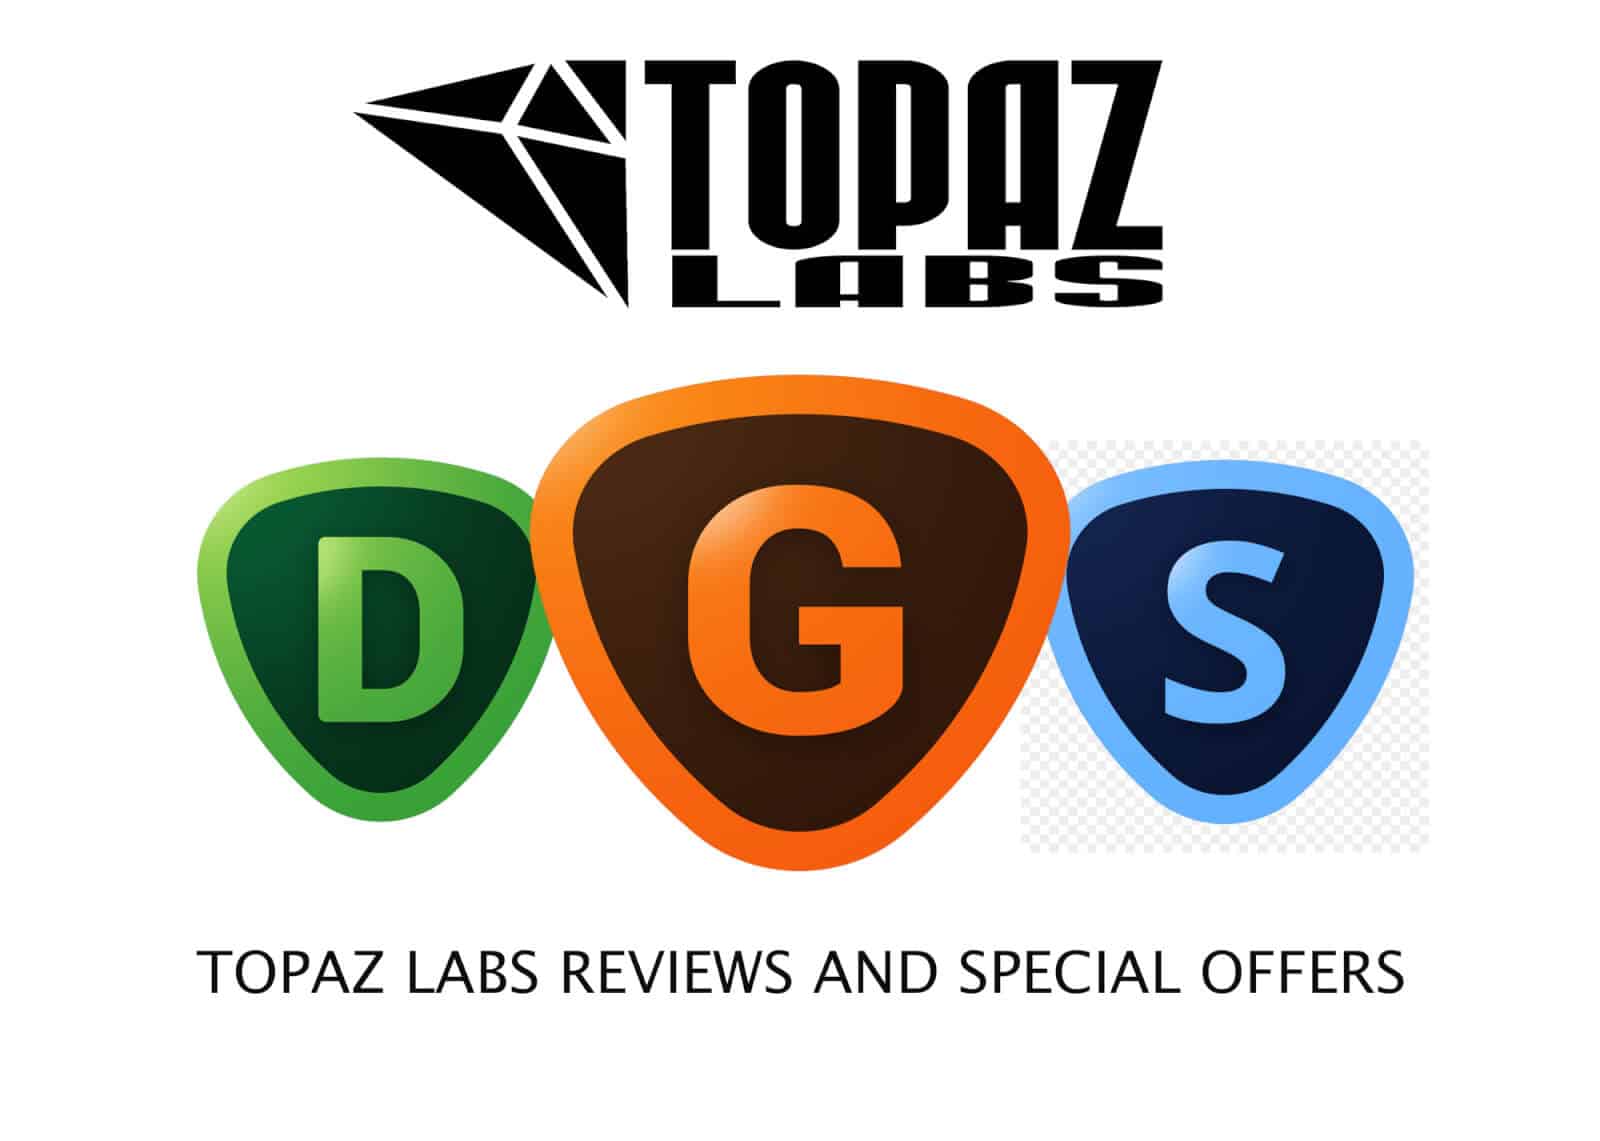 Topaz Promo code and Discount code for worldwide use.